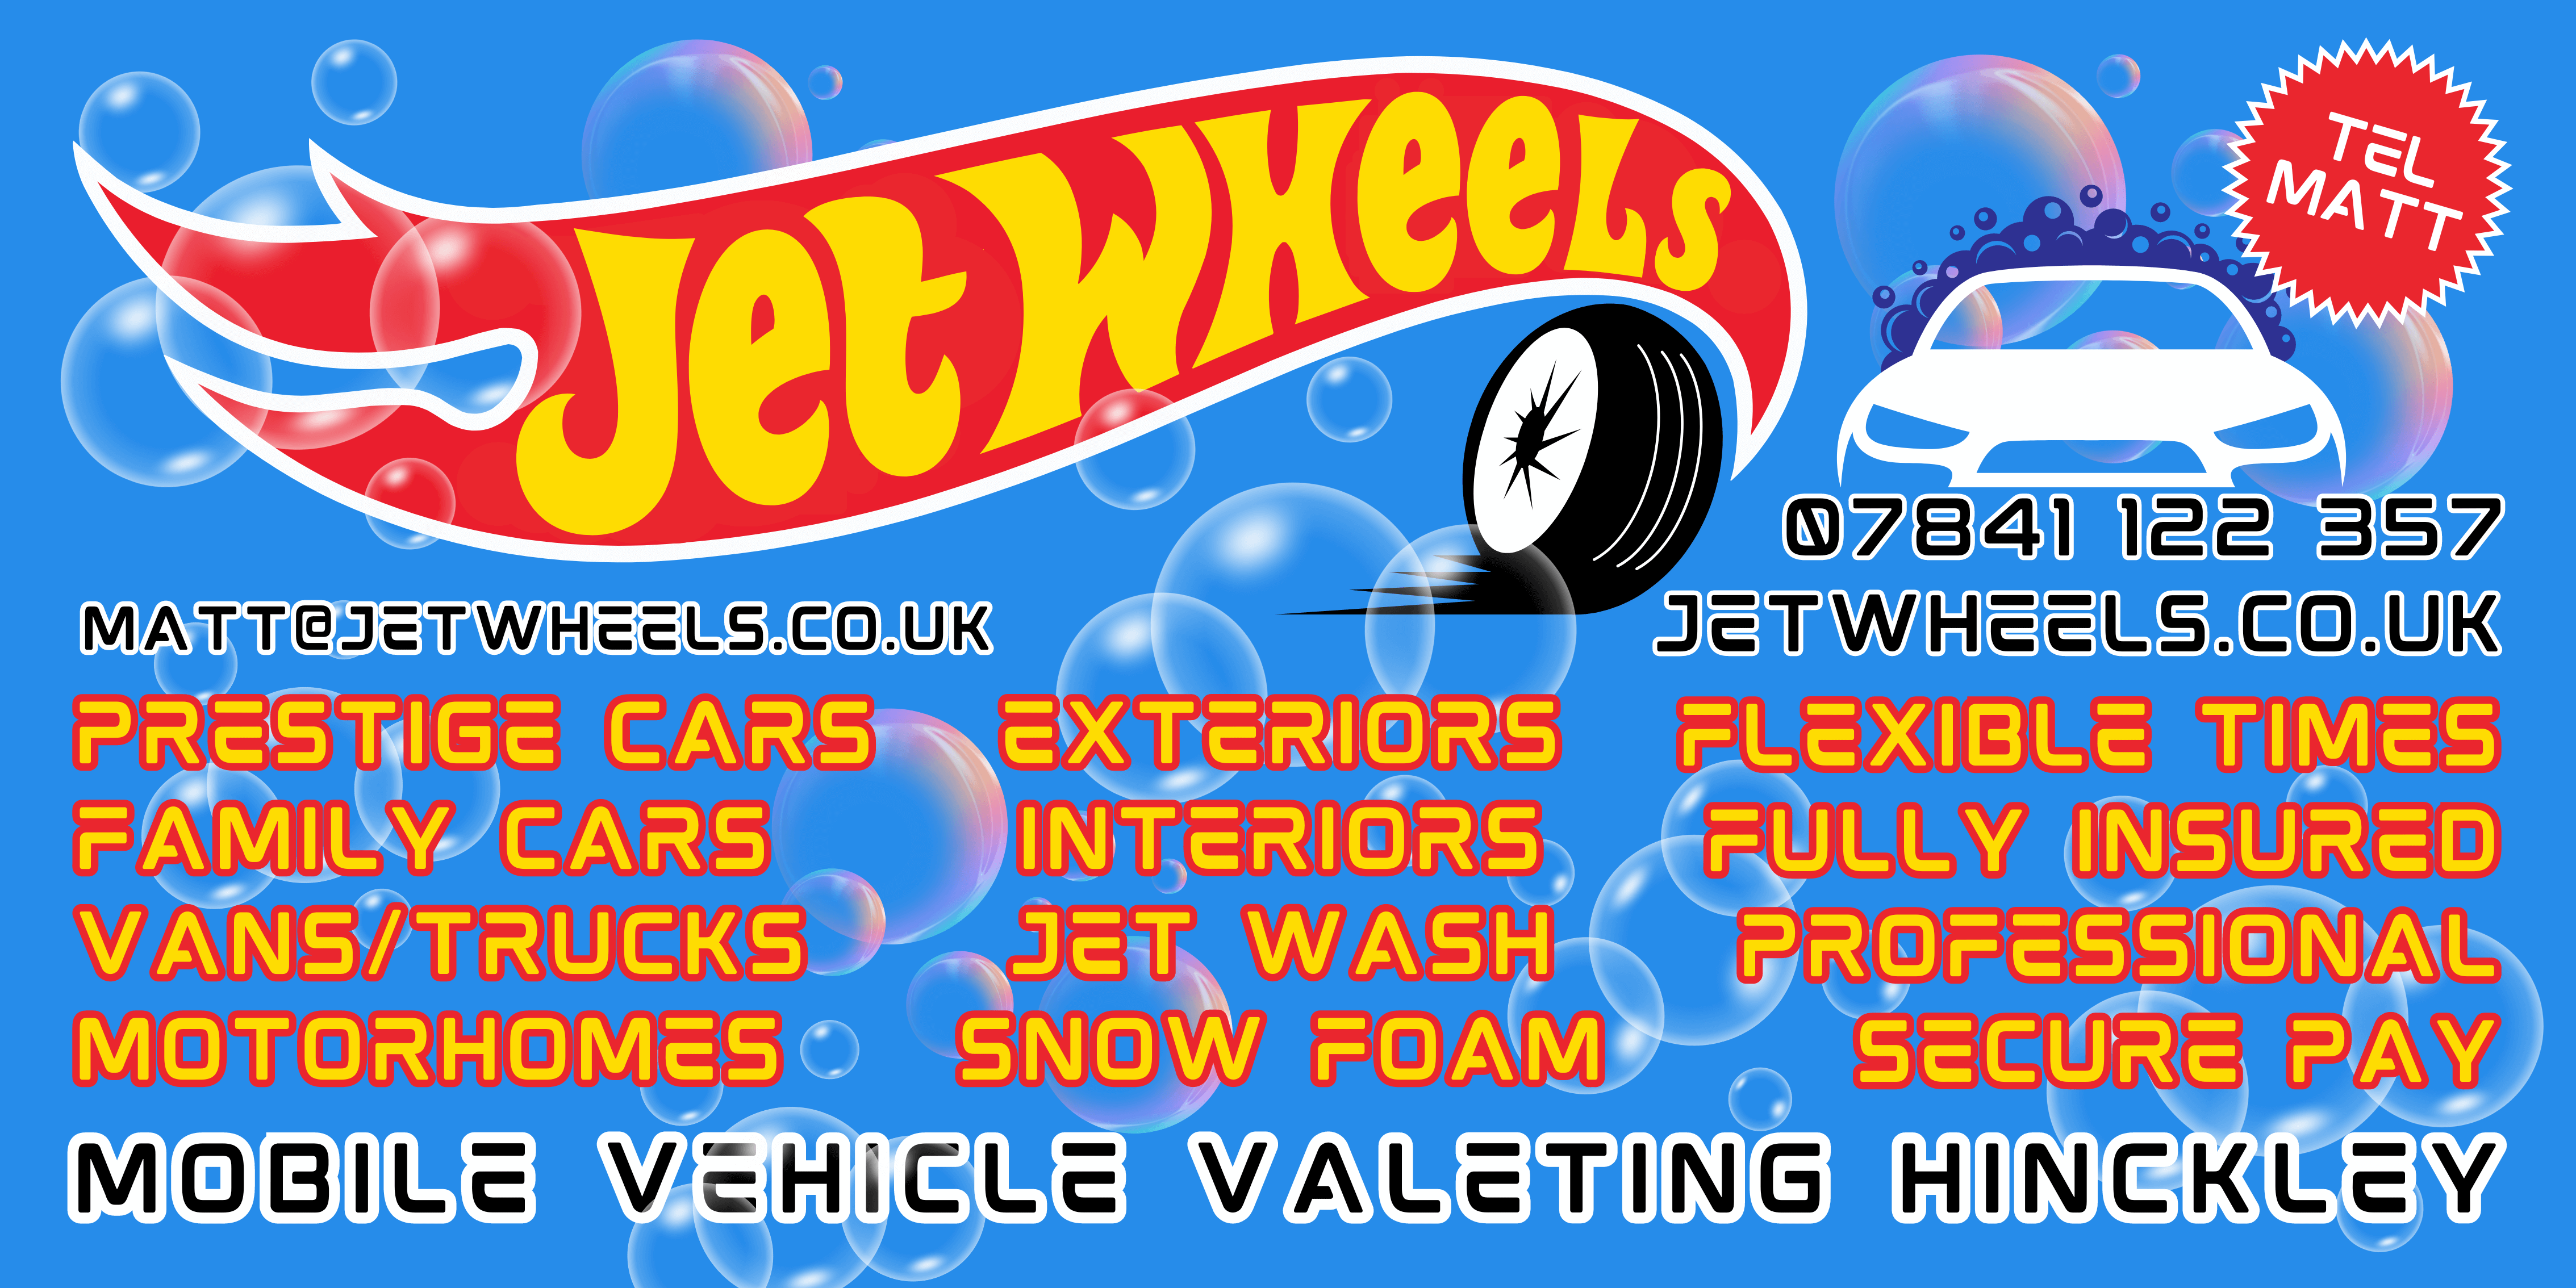 mobile valeting leicester